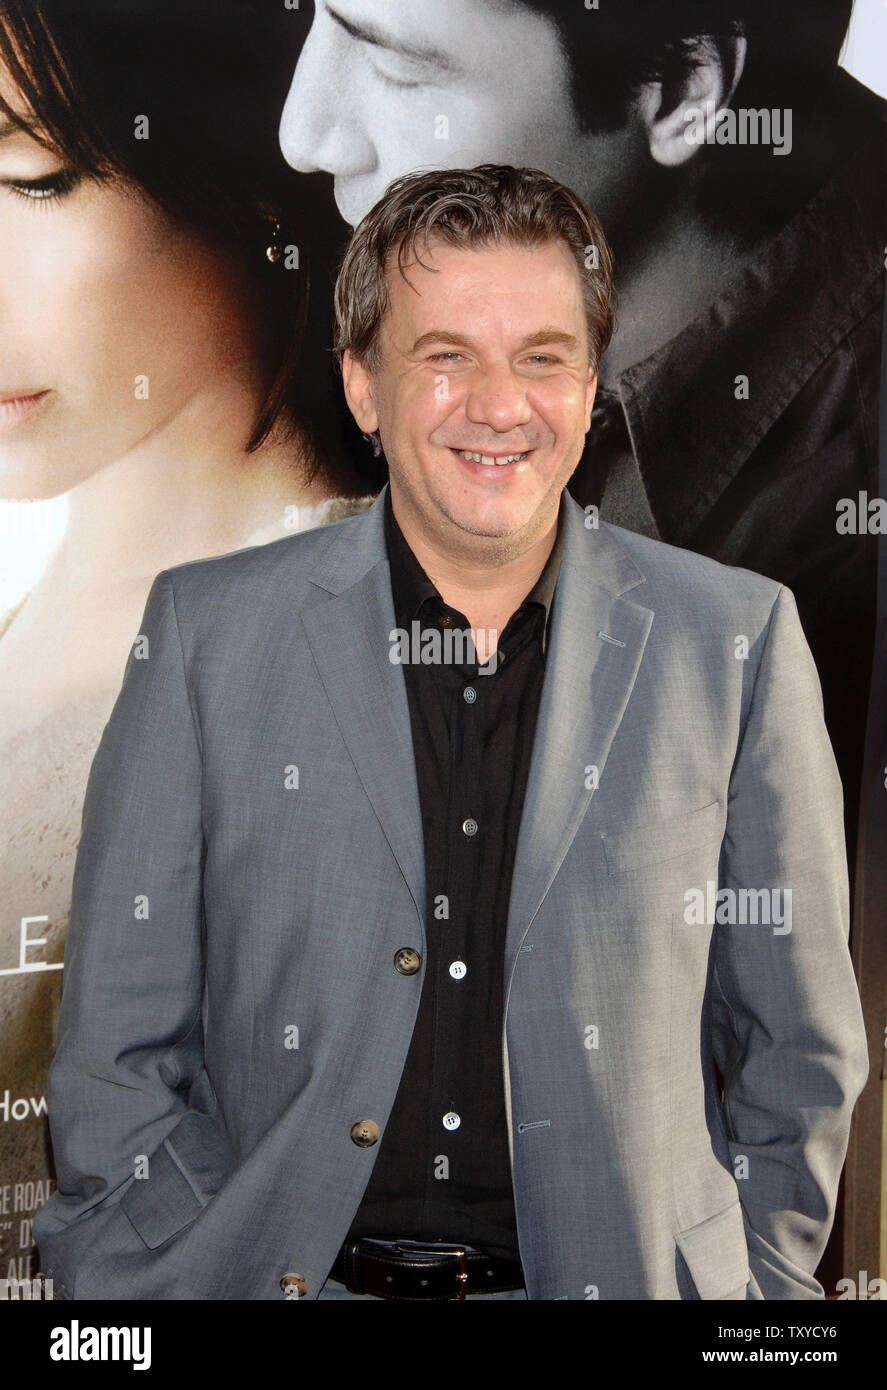 Director Alejandro Agresti of Argentina attends the world premiere of his new motion picture drama 'The Lake House' at the Pacific Cinerama Dome in the Hollywood section of Los Angeles, California on June 13, 2006. The movie portrays the romance between a doctor (Sandra Bullock) and an architect (Keanu Reeves) who are living in a house two years apart. The movie opens in the U.S. on June 16. (UPI Photo/Jim Ruymen) Stock Photo